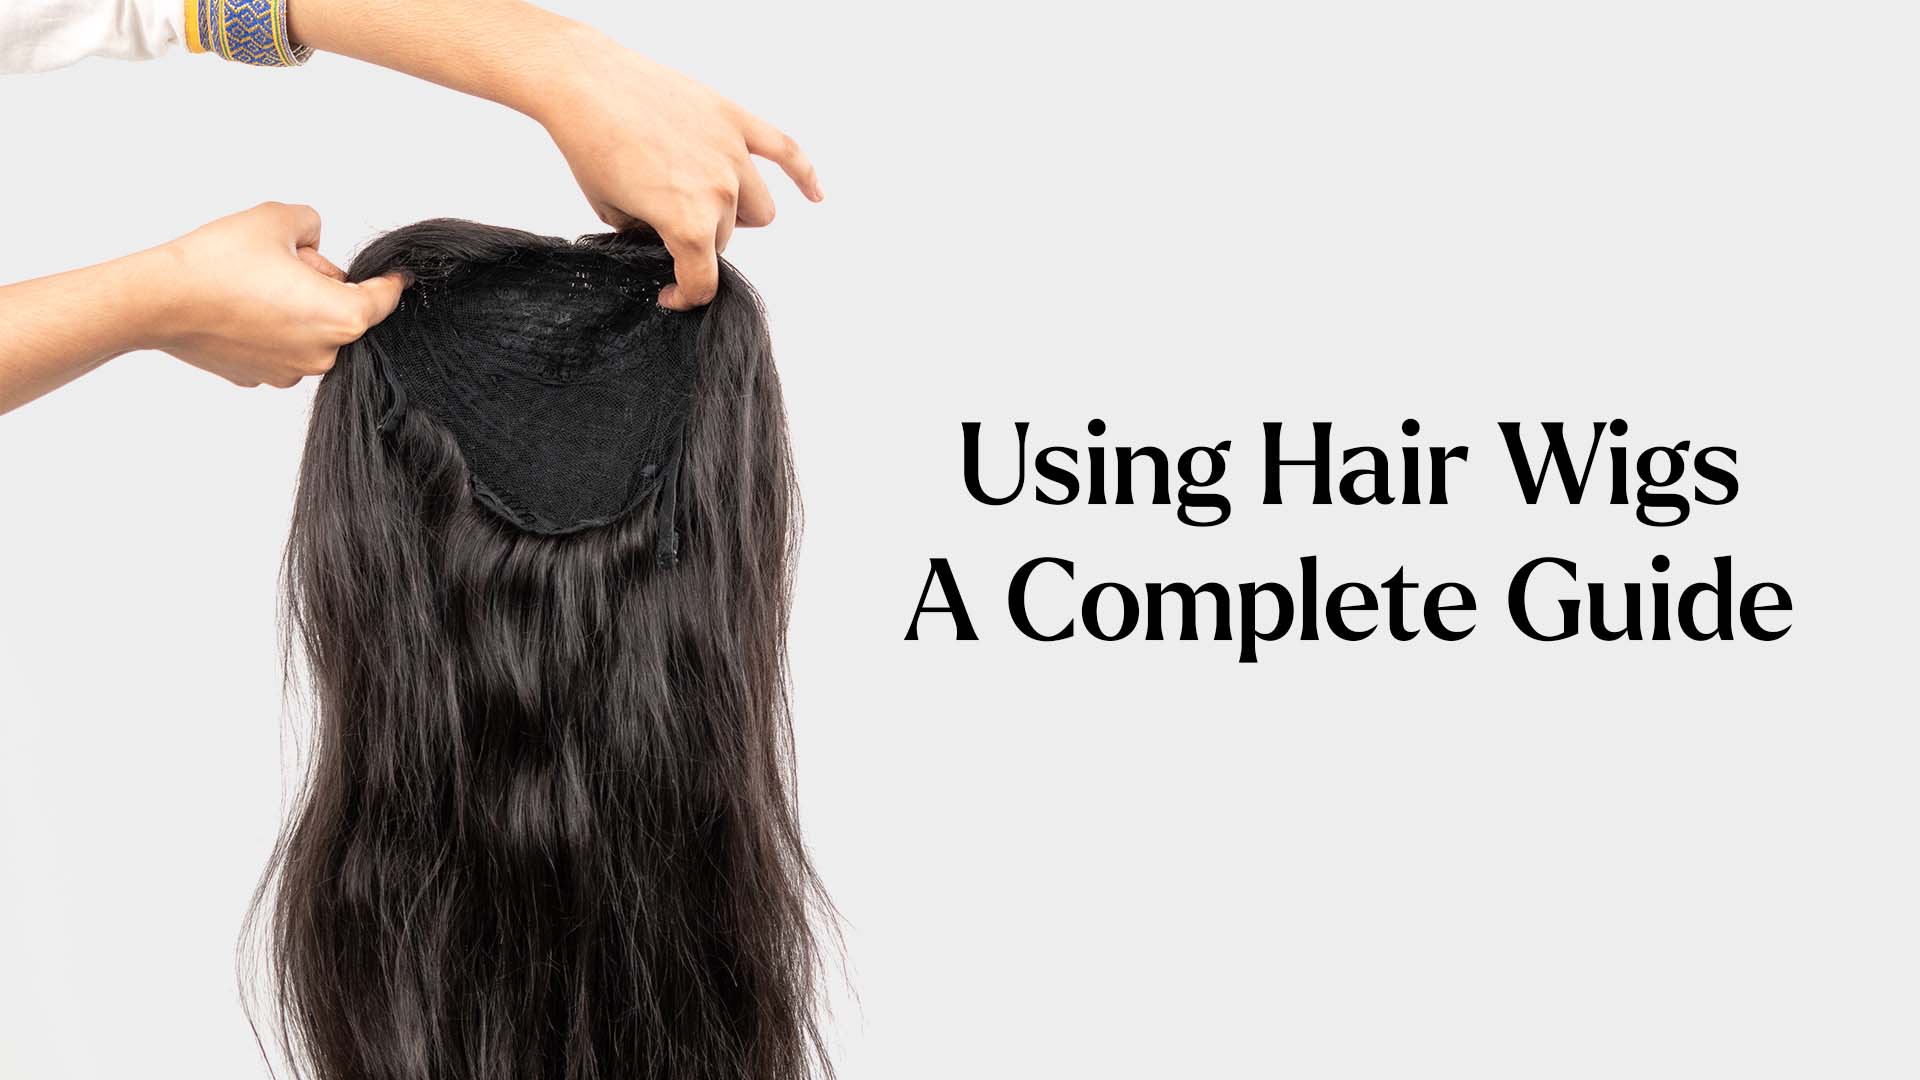 Using Hair Wigs: A Complete Guide